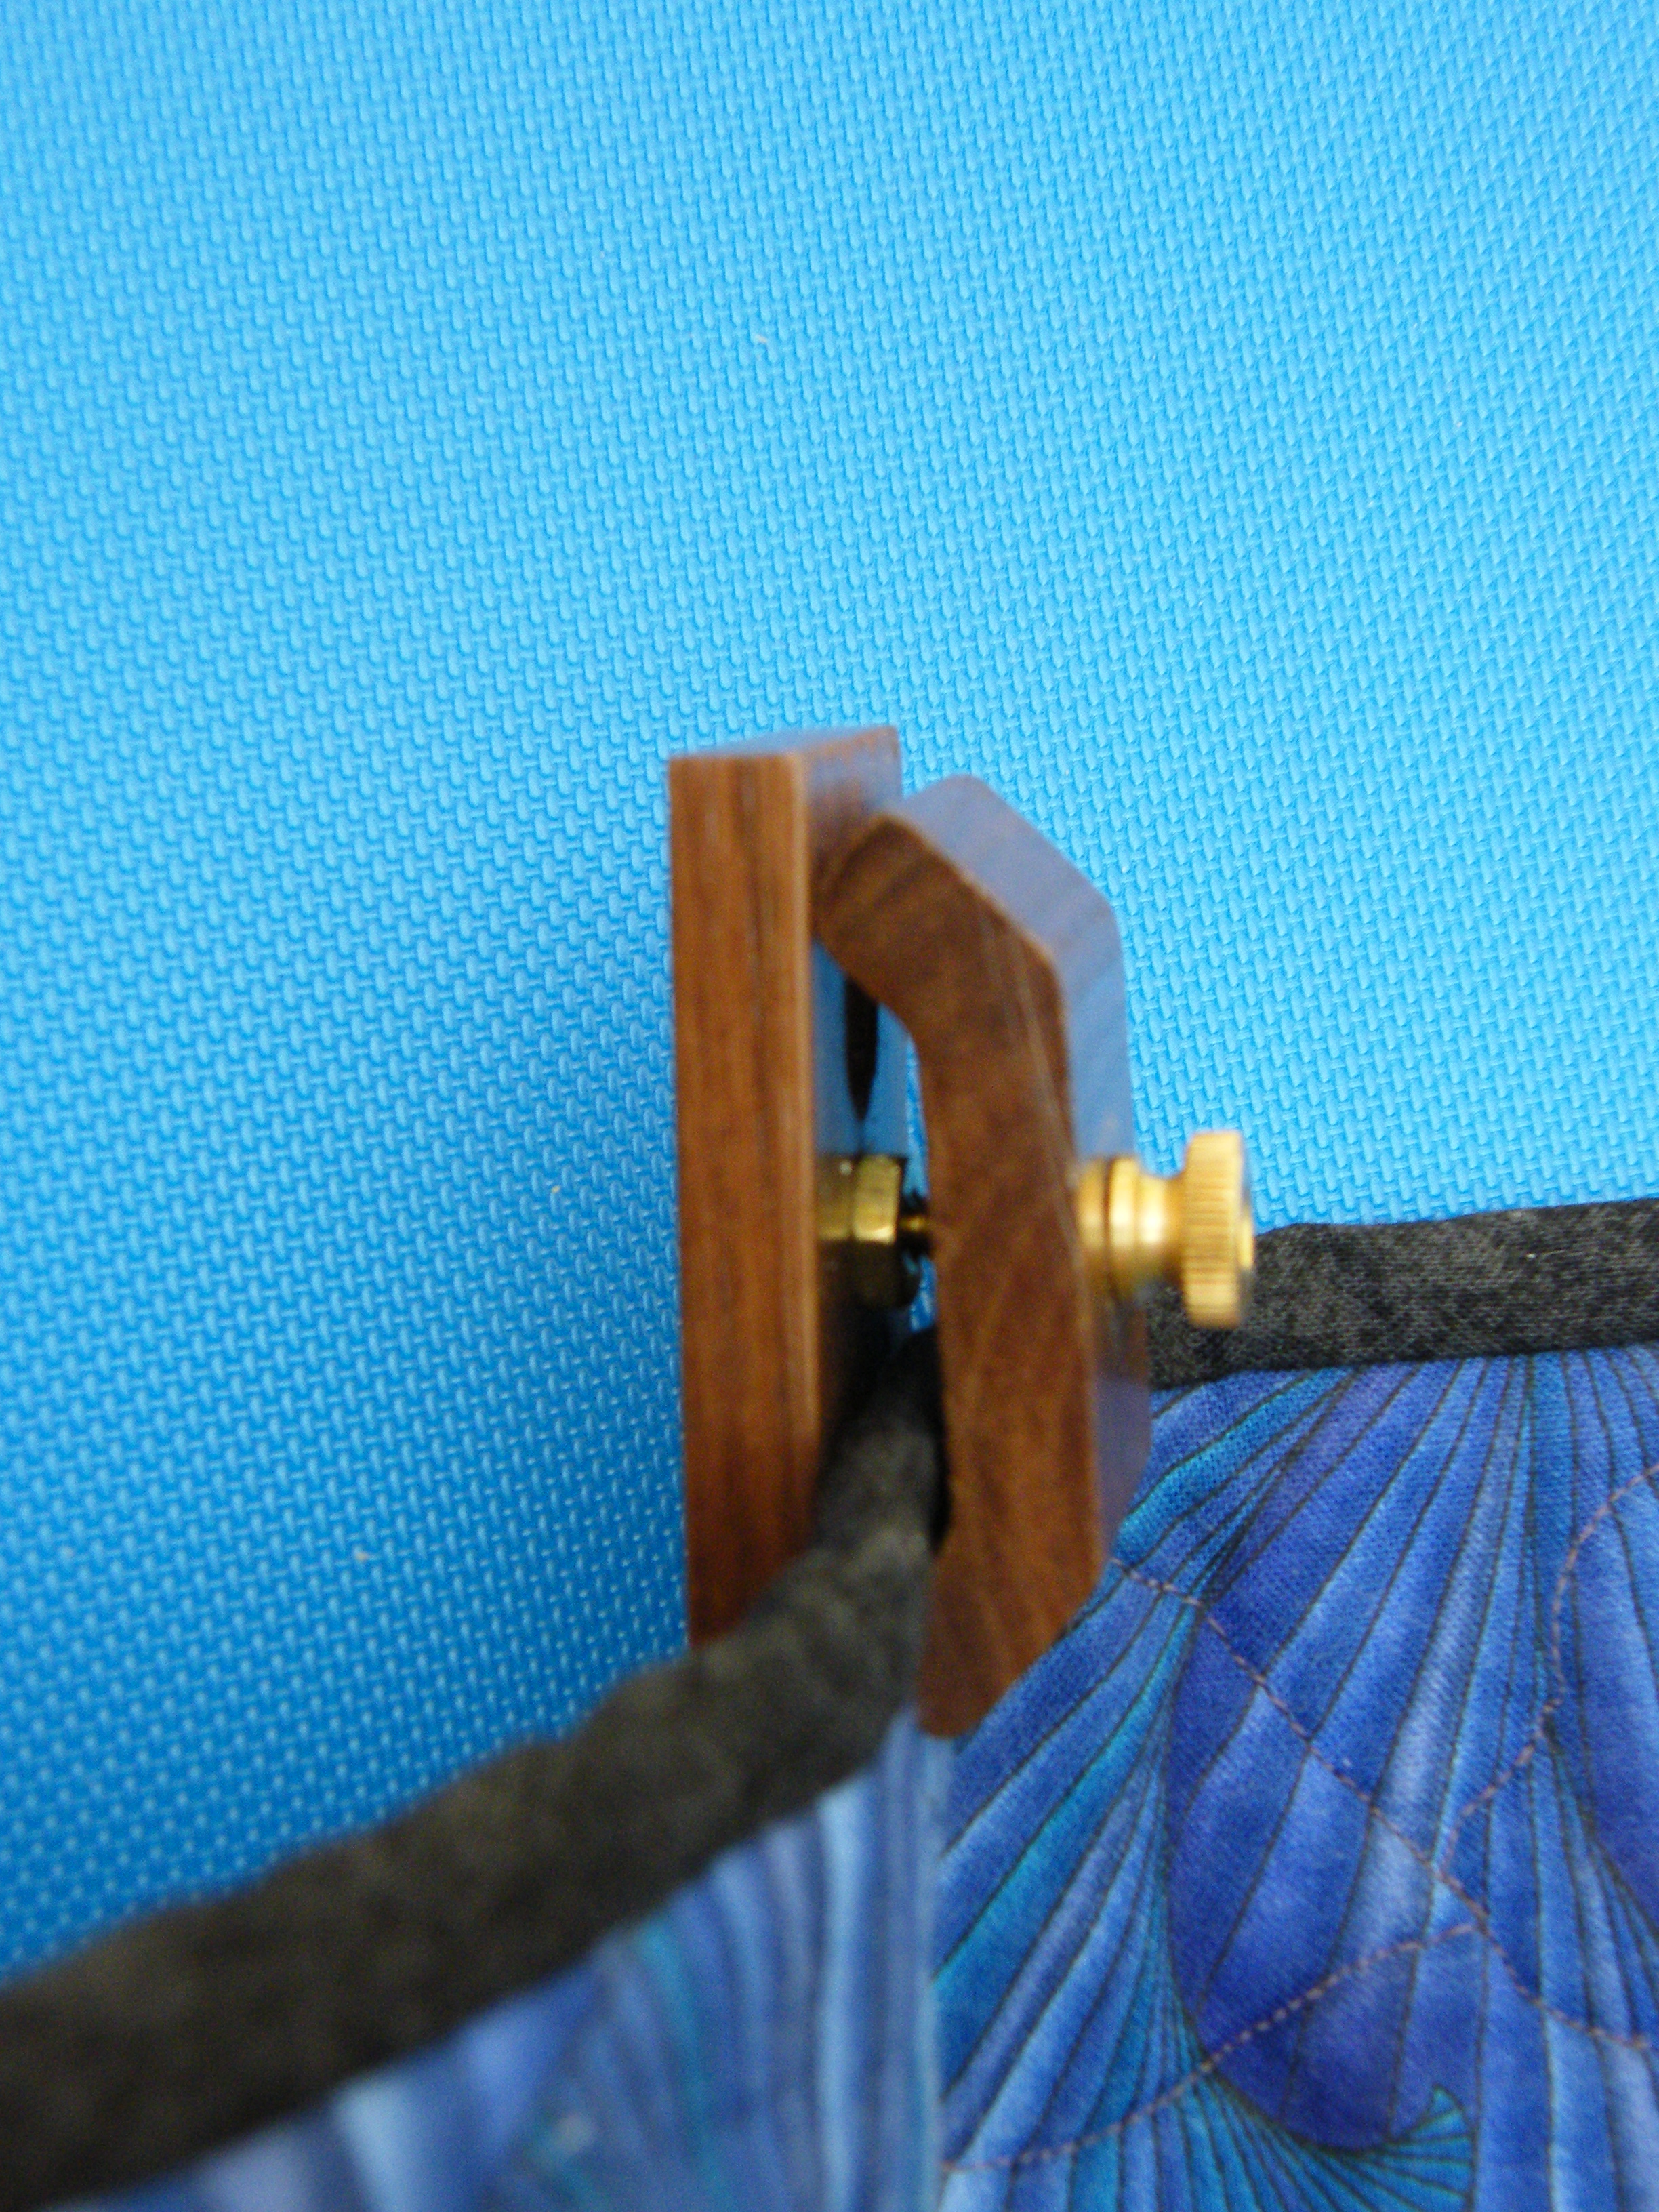 Mini Hang-Ups™ quilt hangers use small 3M™ Command strips